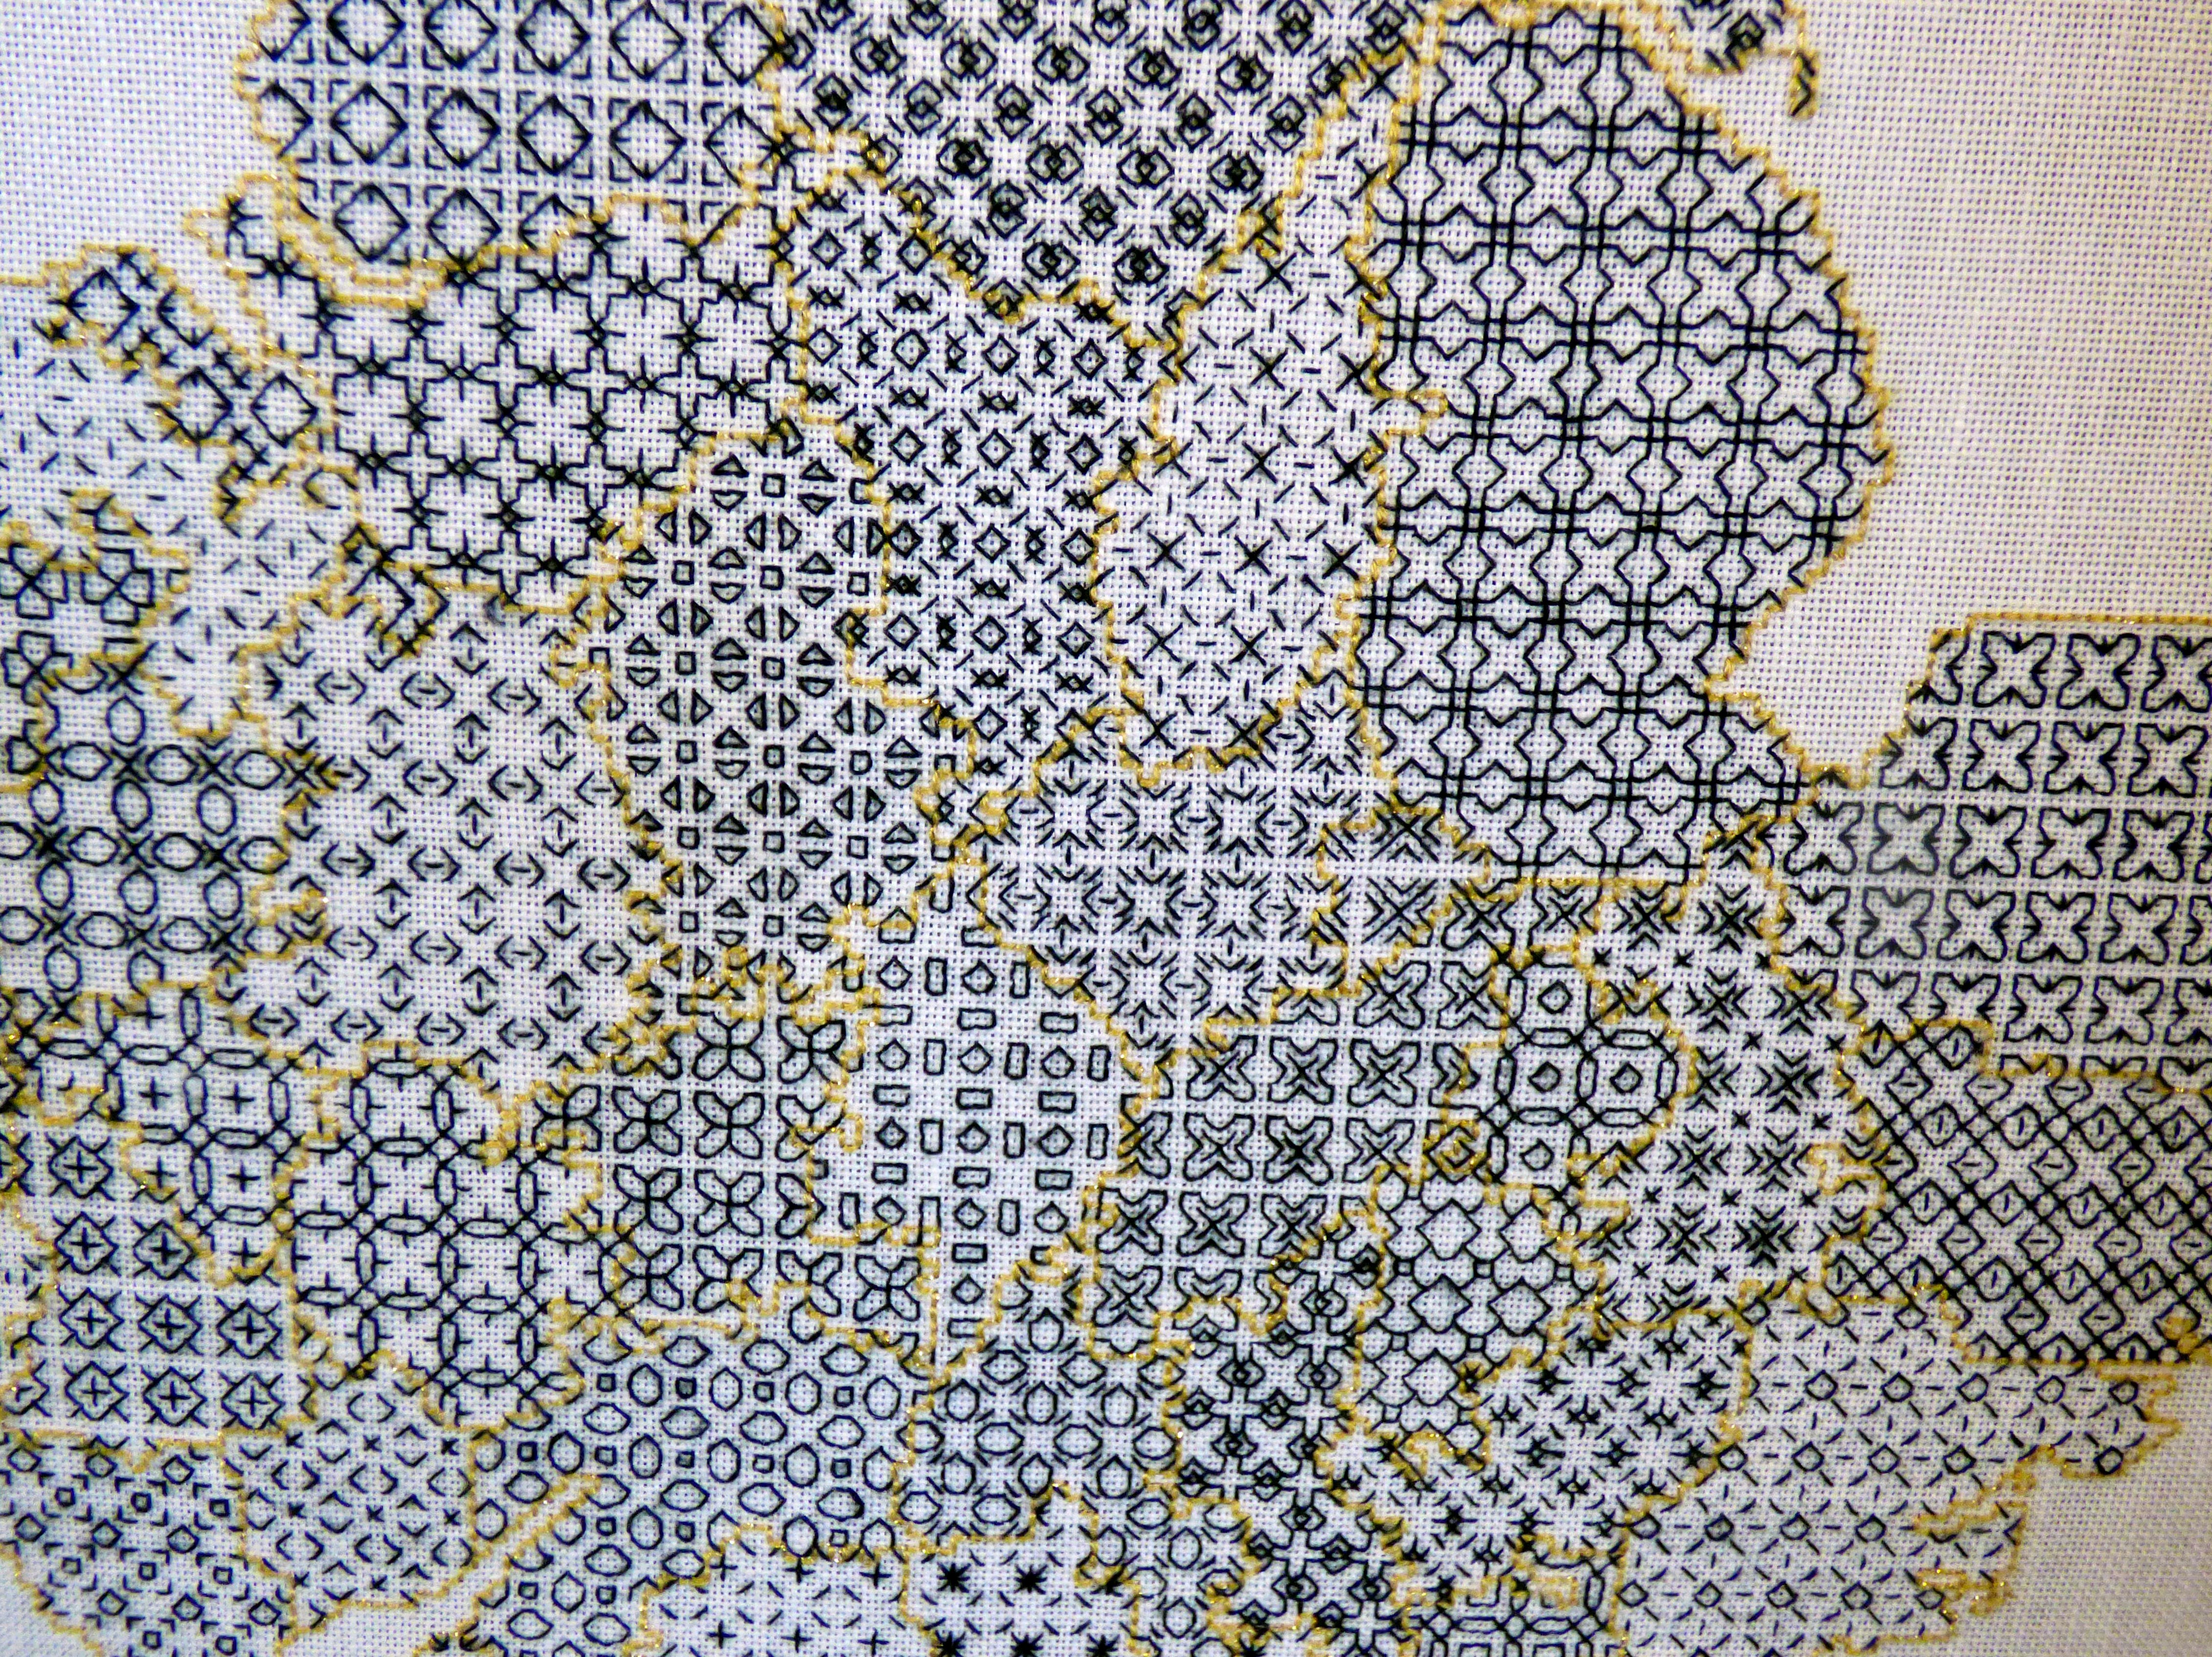 detail of THE REAL COUNTIES OF GREAT BRITAIN by Christine Bourne, blackwork